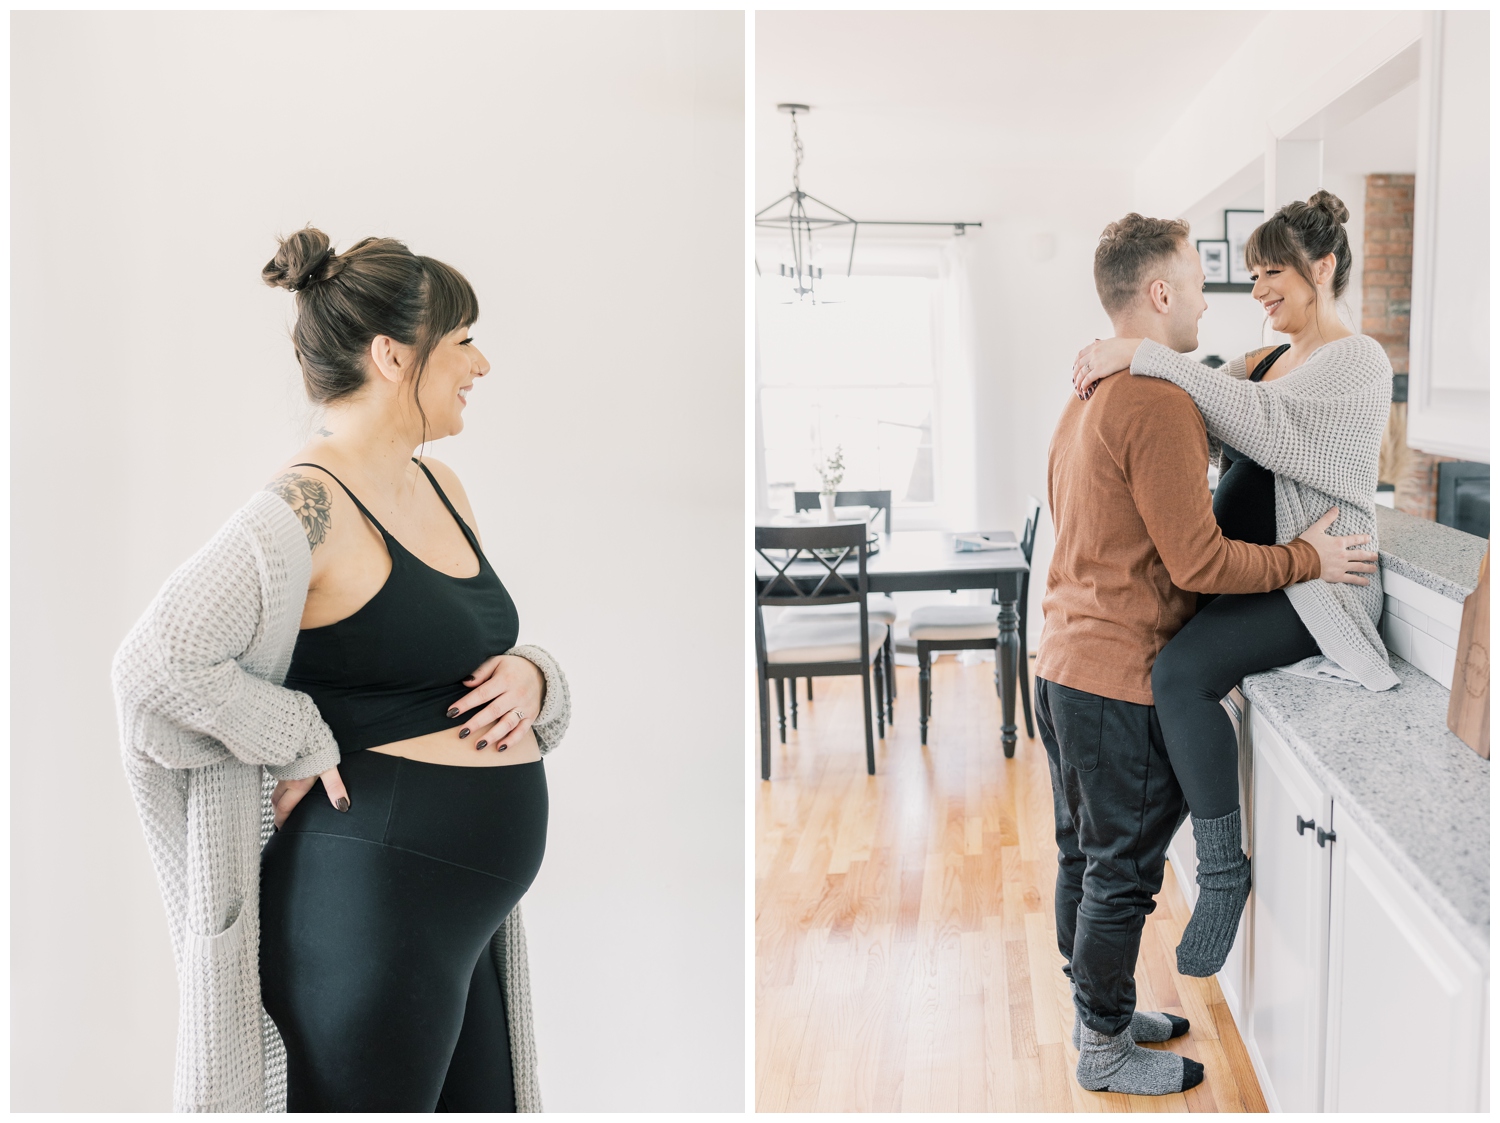 Natural and warm images of a Cozy Maternity Session in Schenectady, NY of new parents awaiting the arrival of their first son.